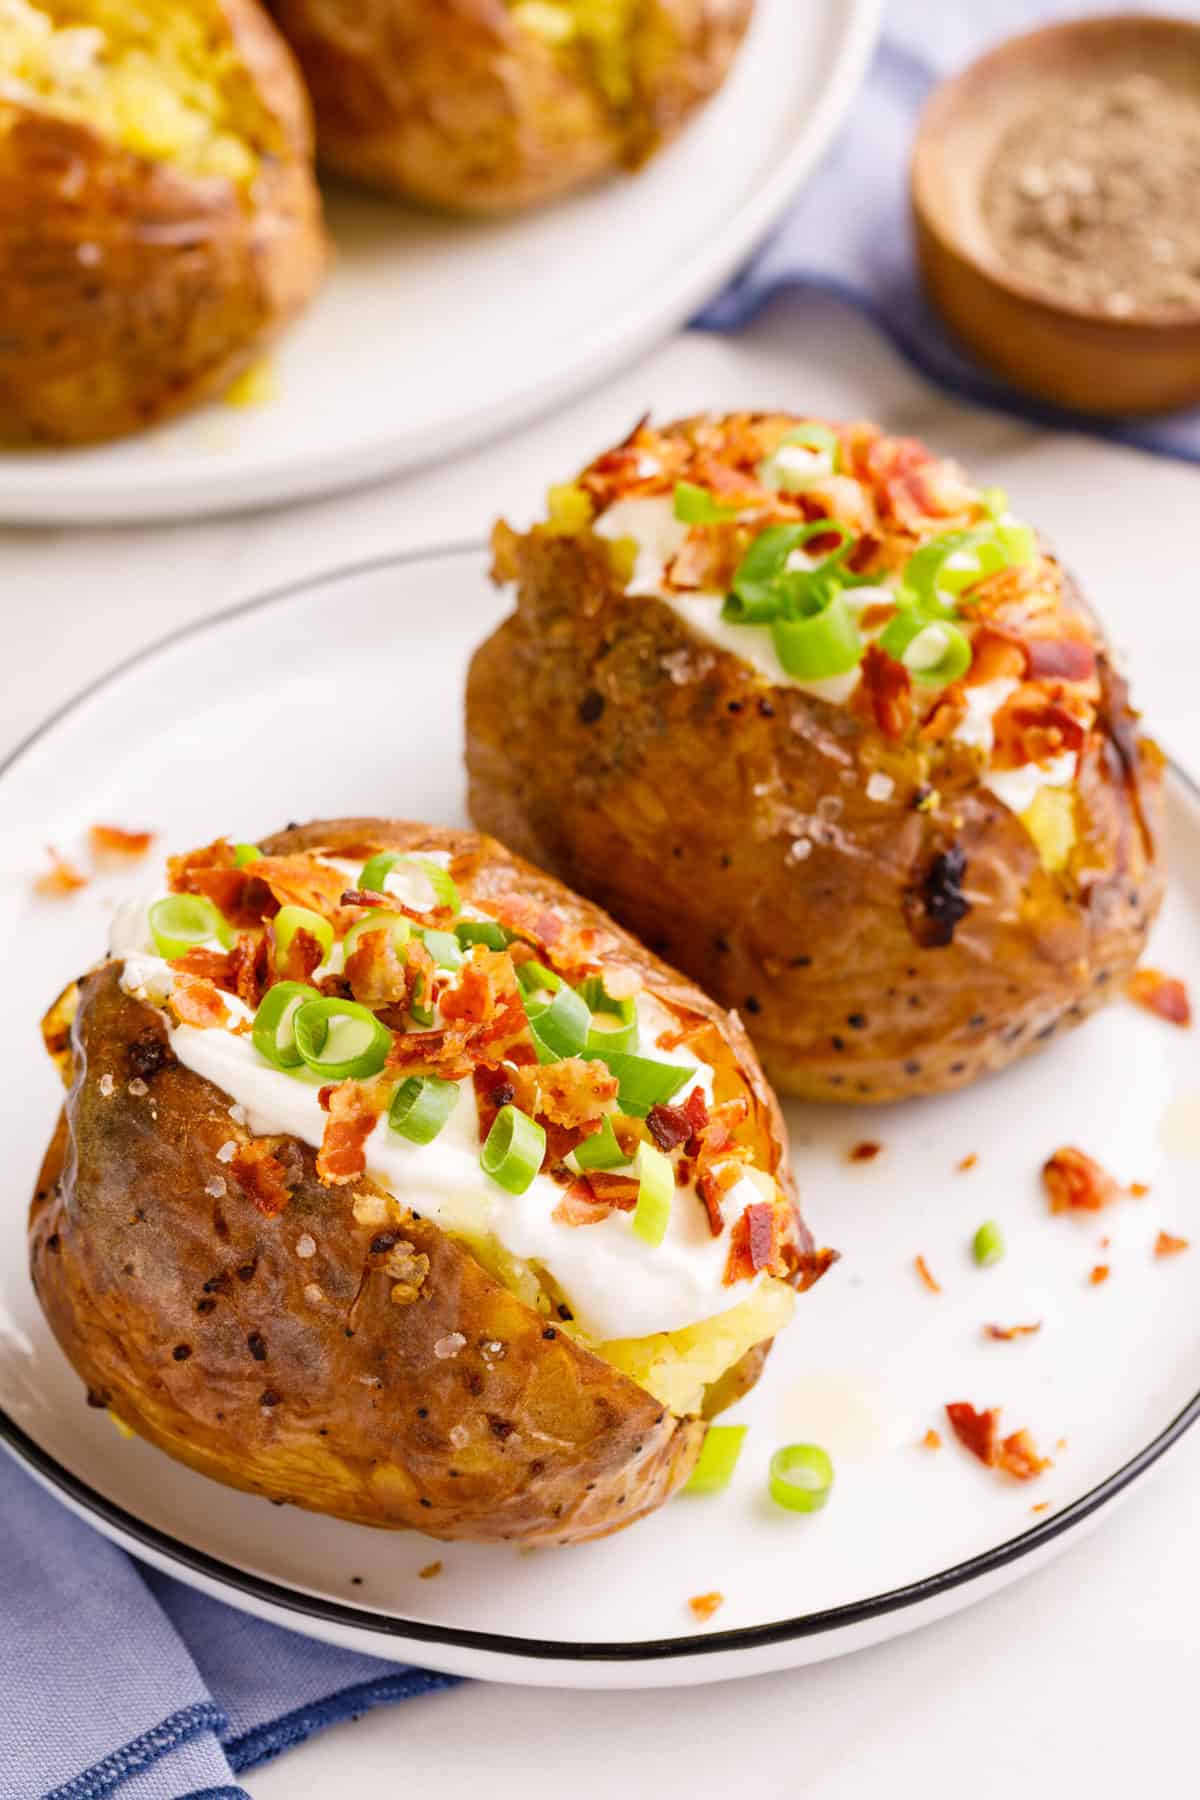 two loaded baked potatoes serve d on a white round plate.